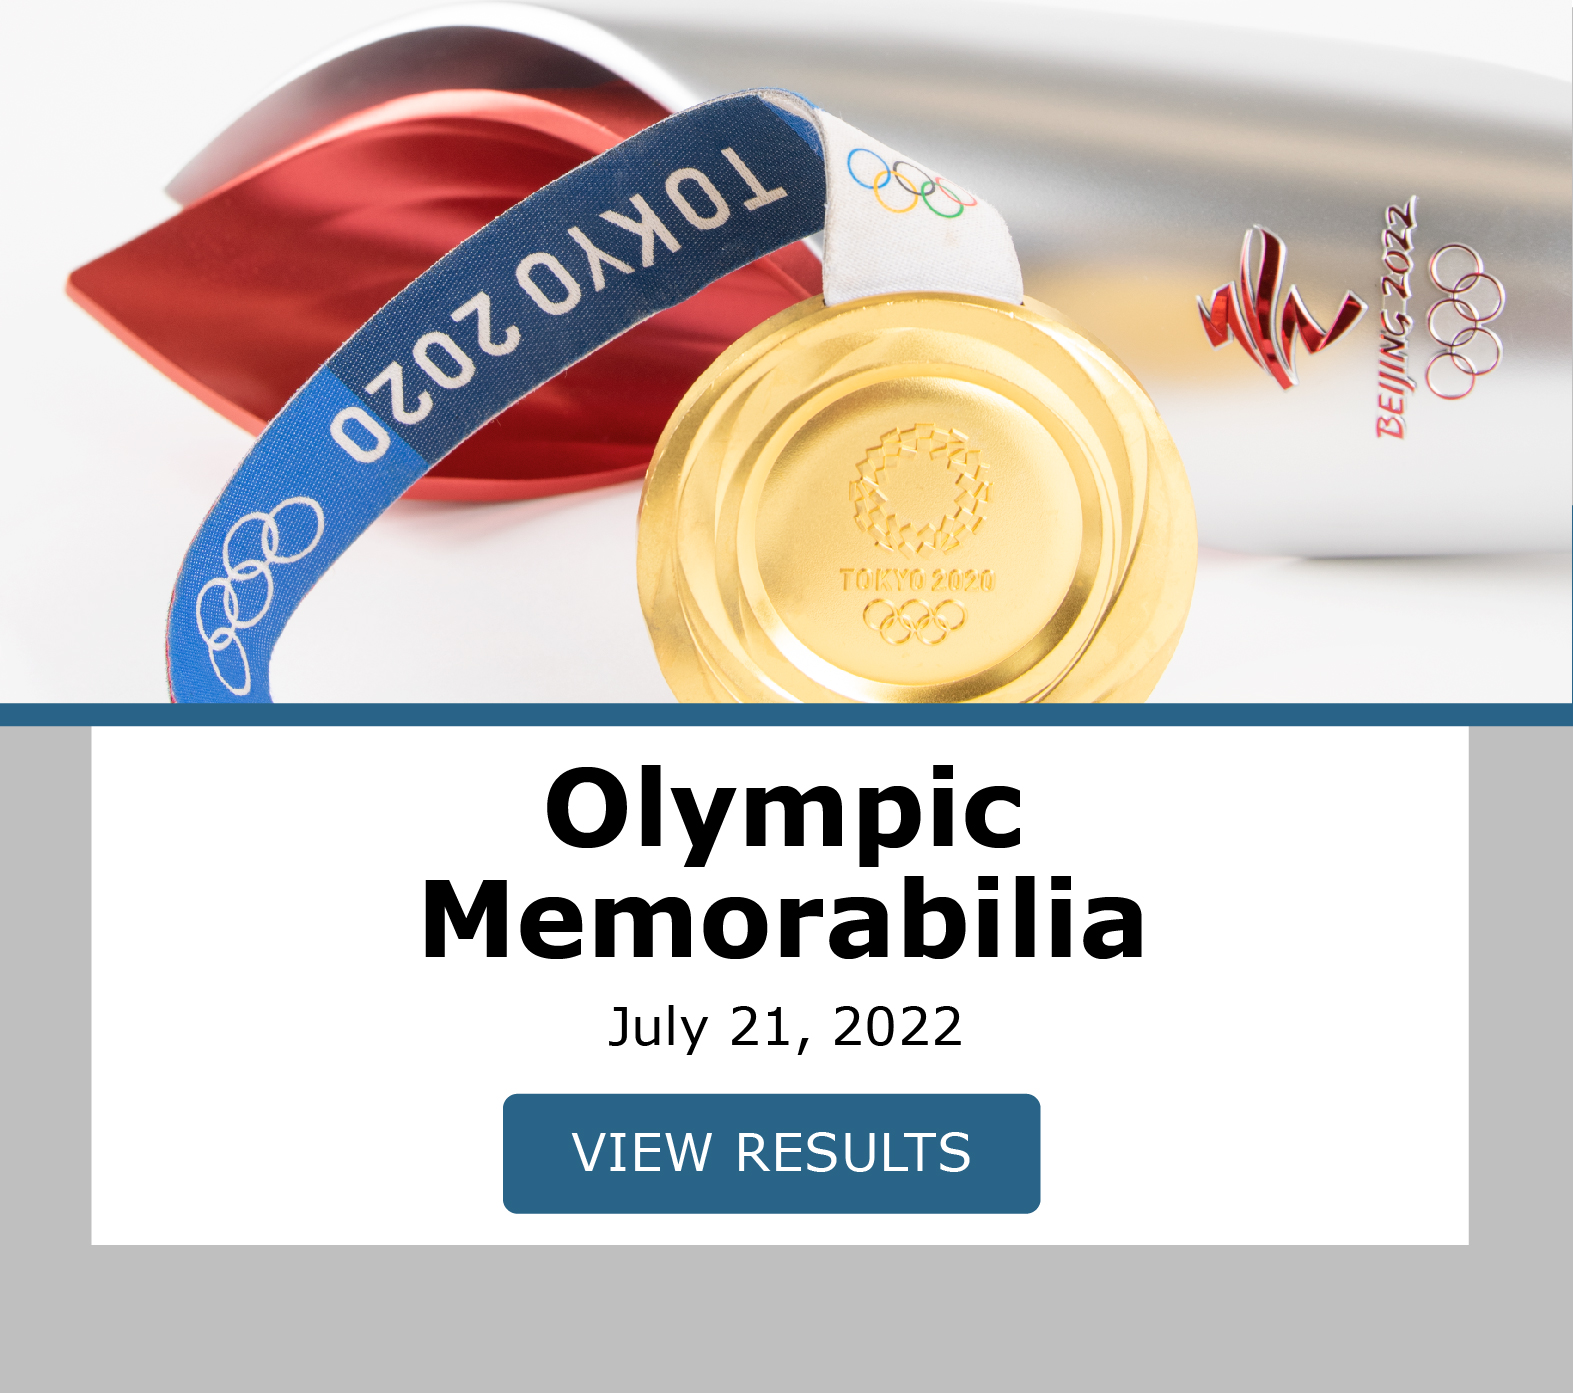 Olympic Memorabilia auction closed July 21. View Results!